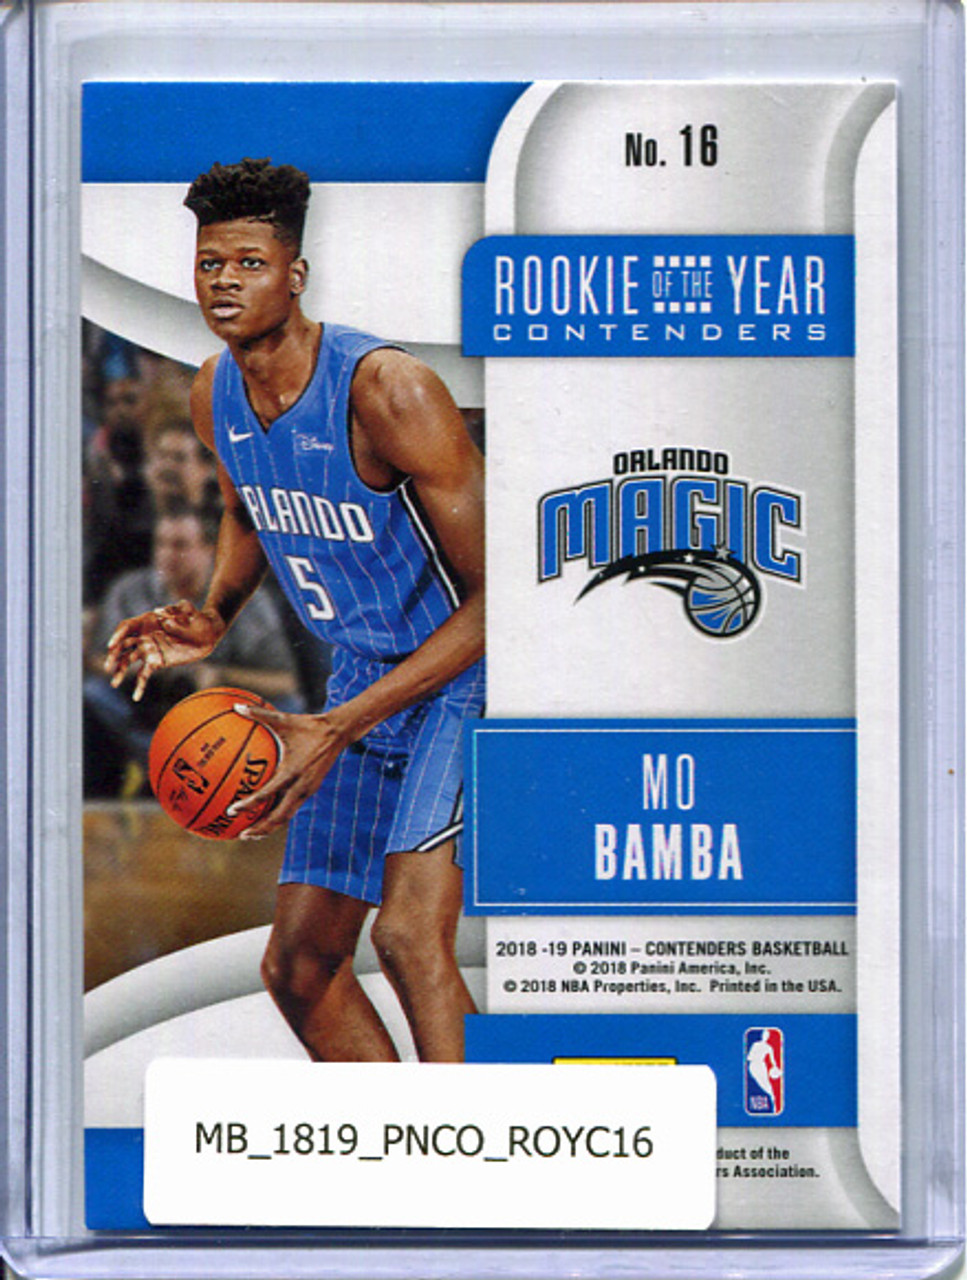 Mo Bamba 2018-19 Contenders, Rookie of the Year Contenders #16 Retail